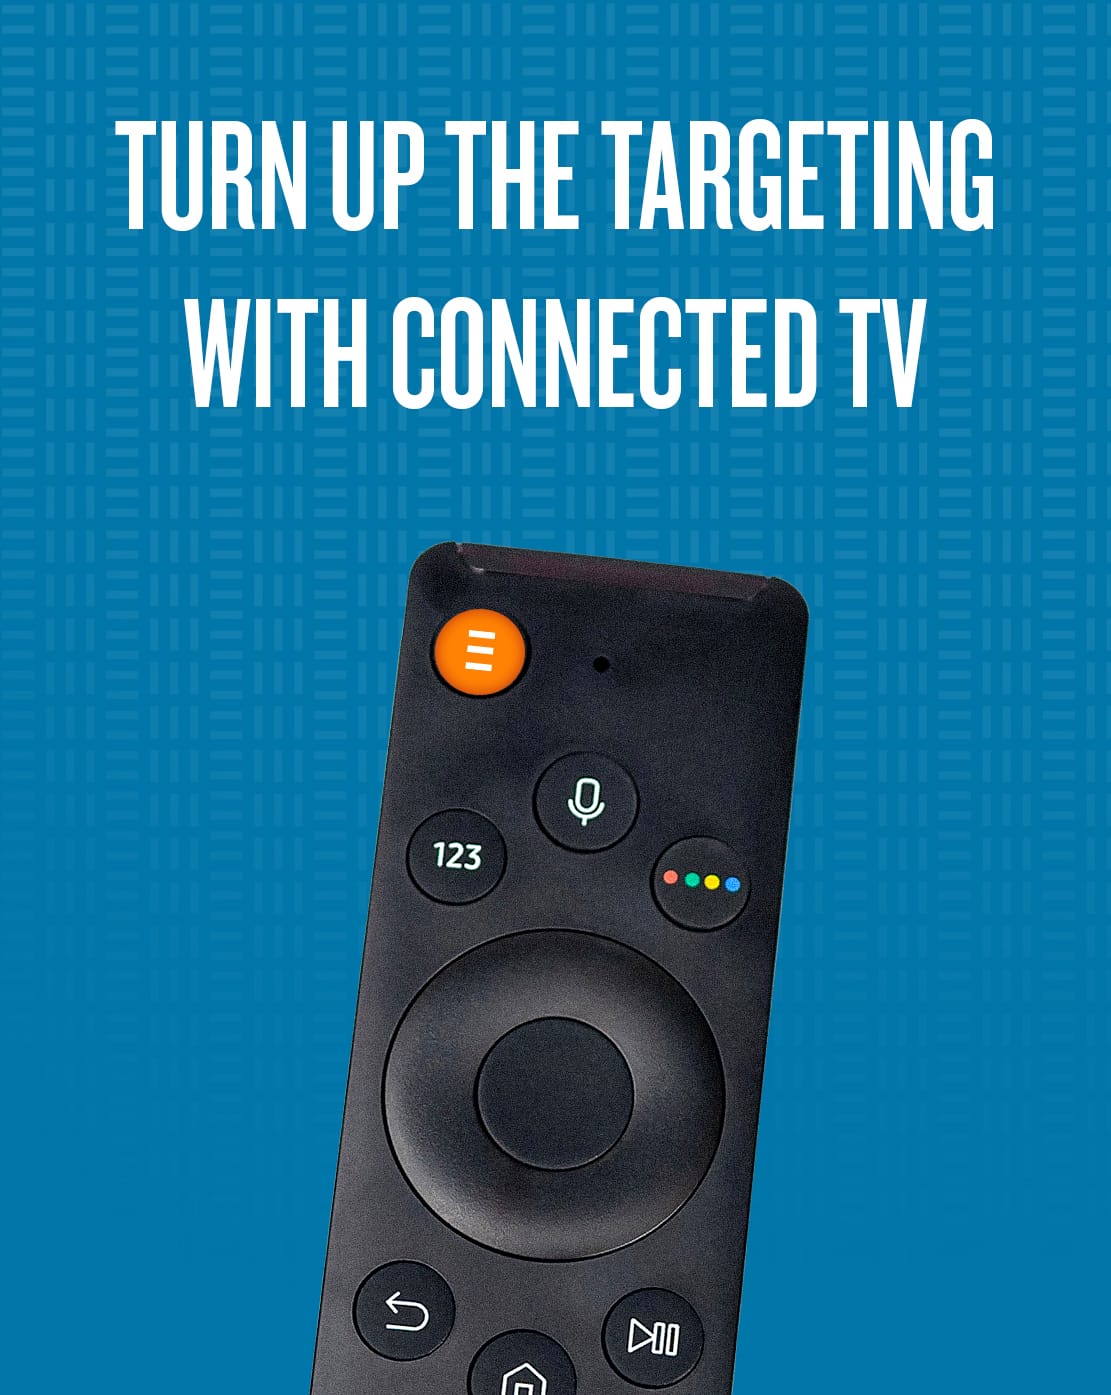 Turn Up The Targeting with Connected TV, an EPIC Blog